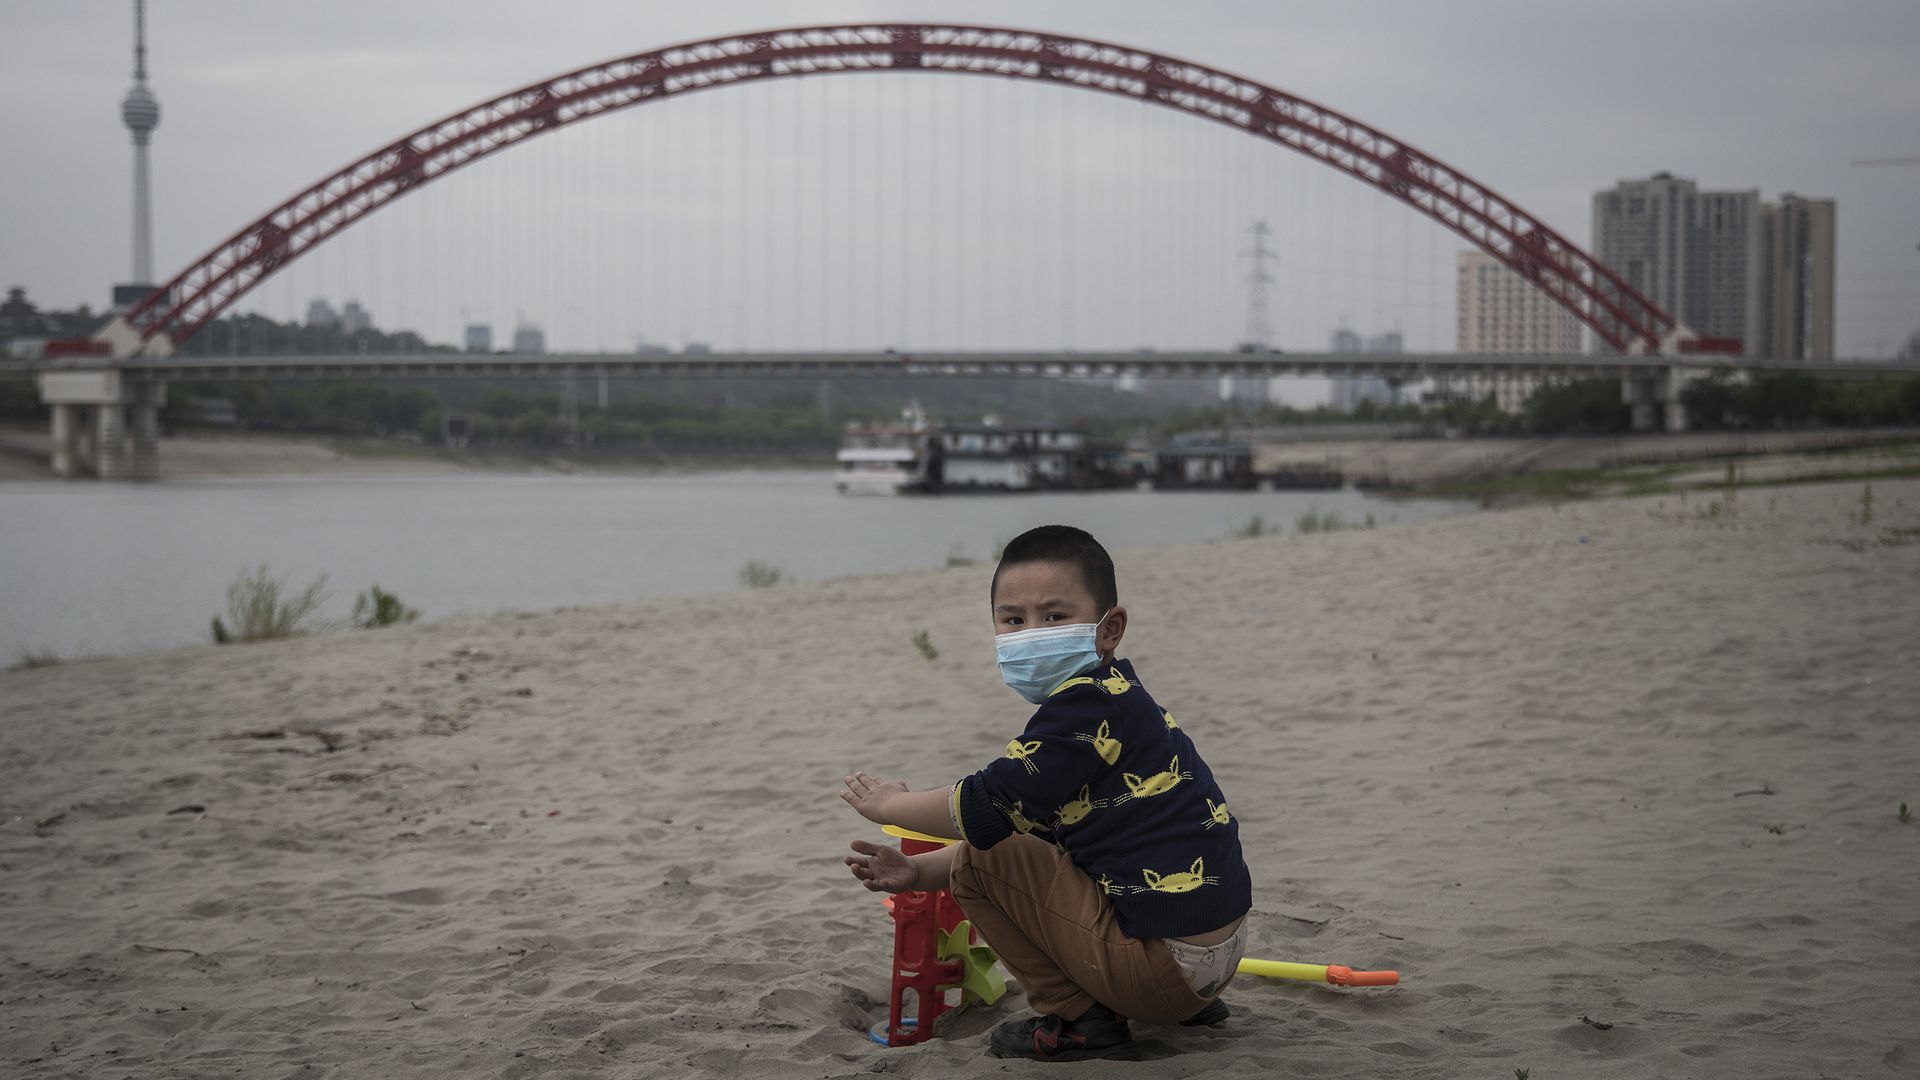 In this image, a boy sits on a beach wearing a face mask